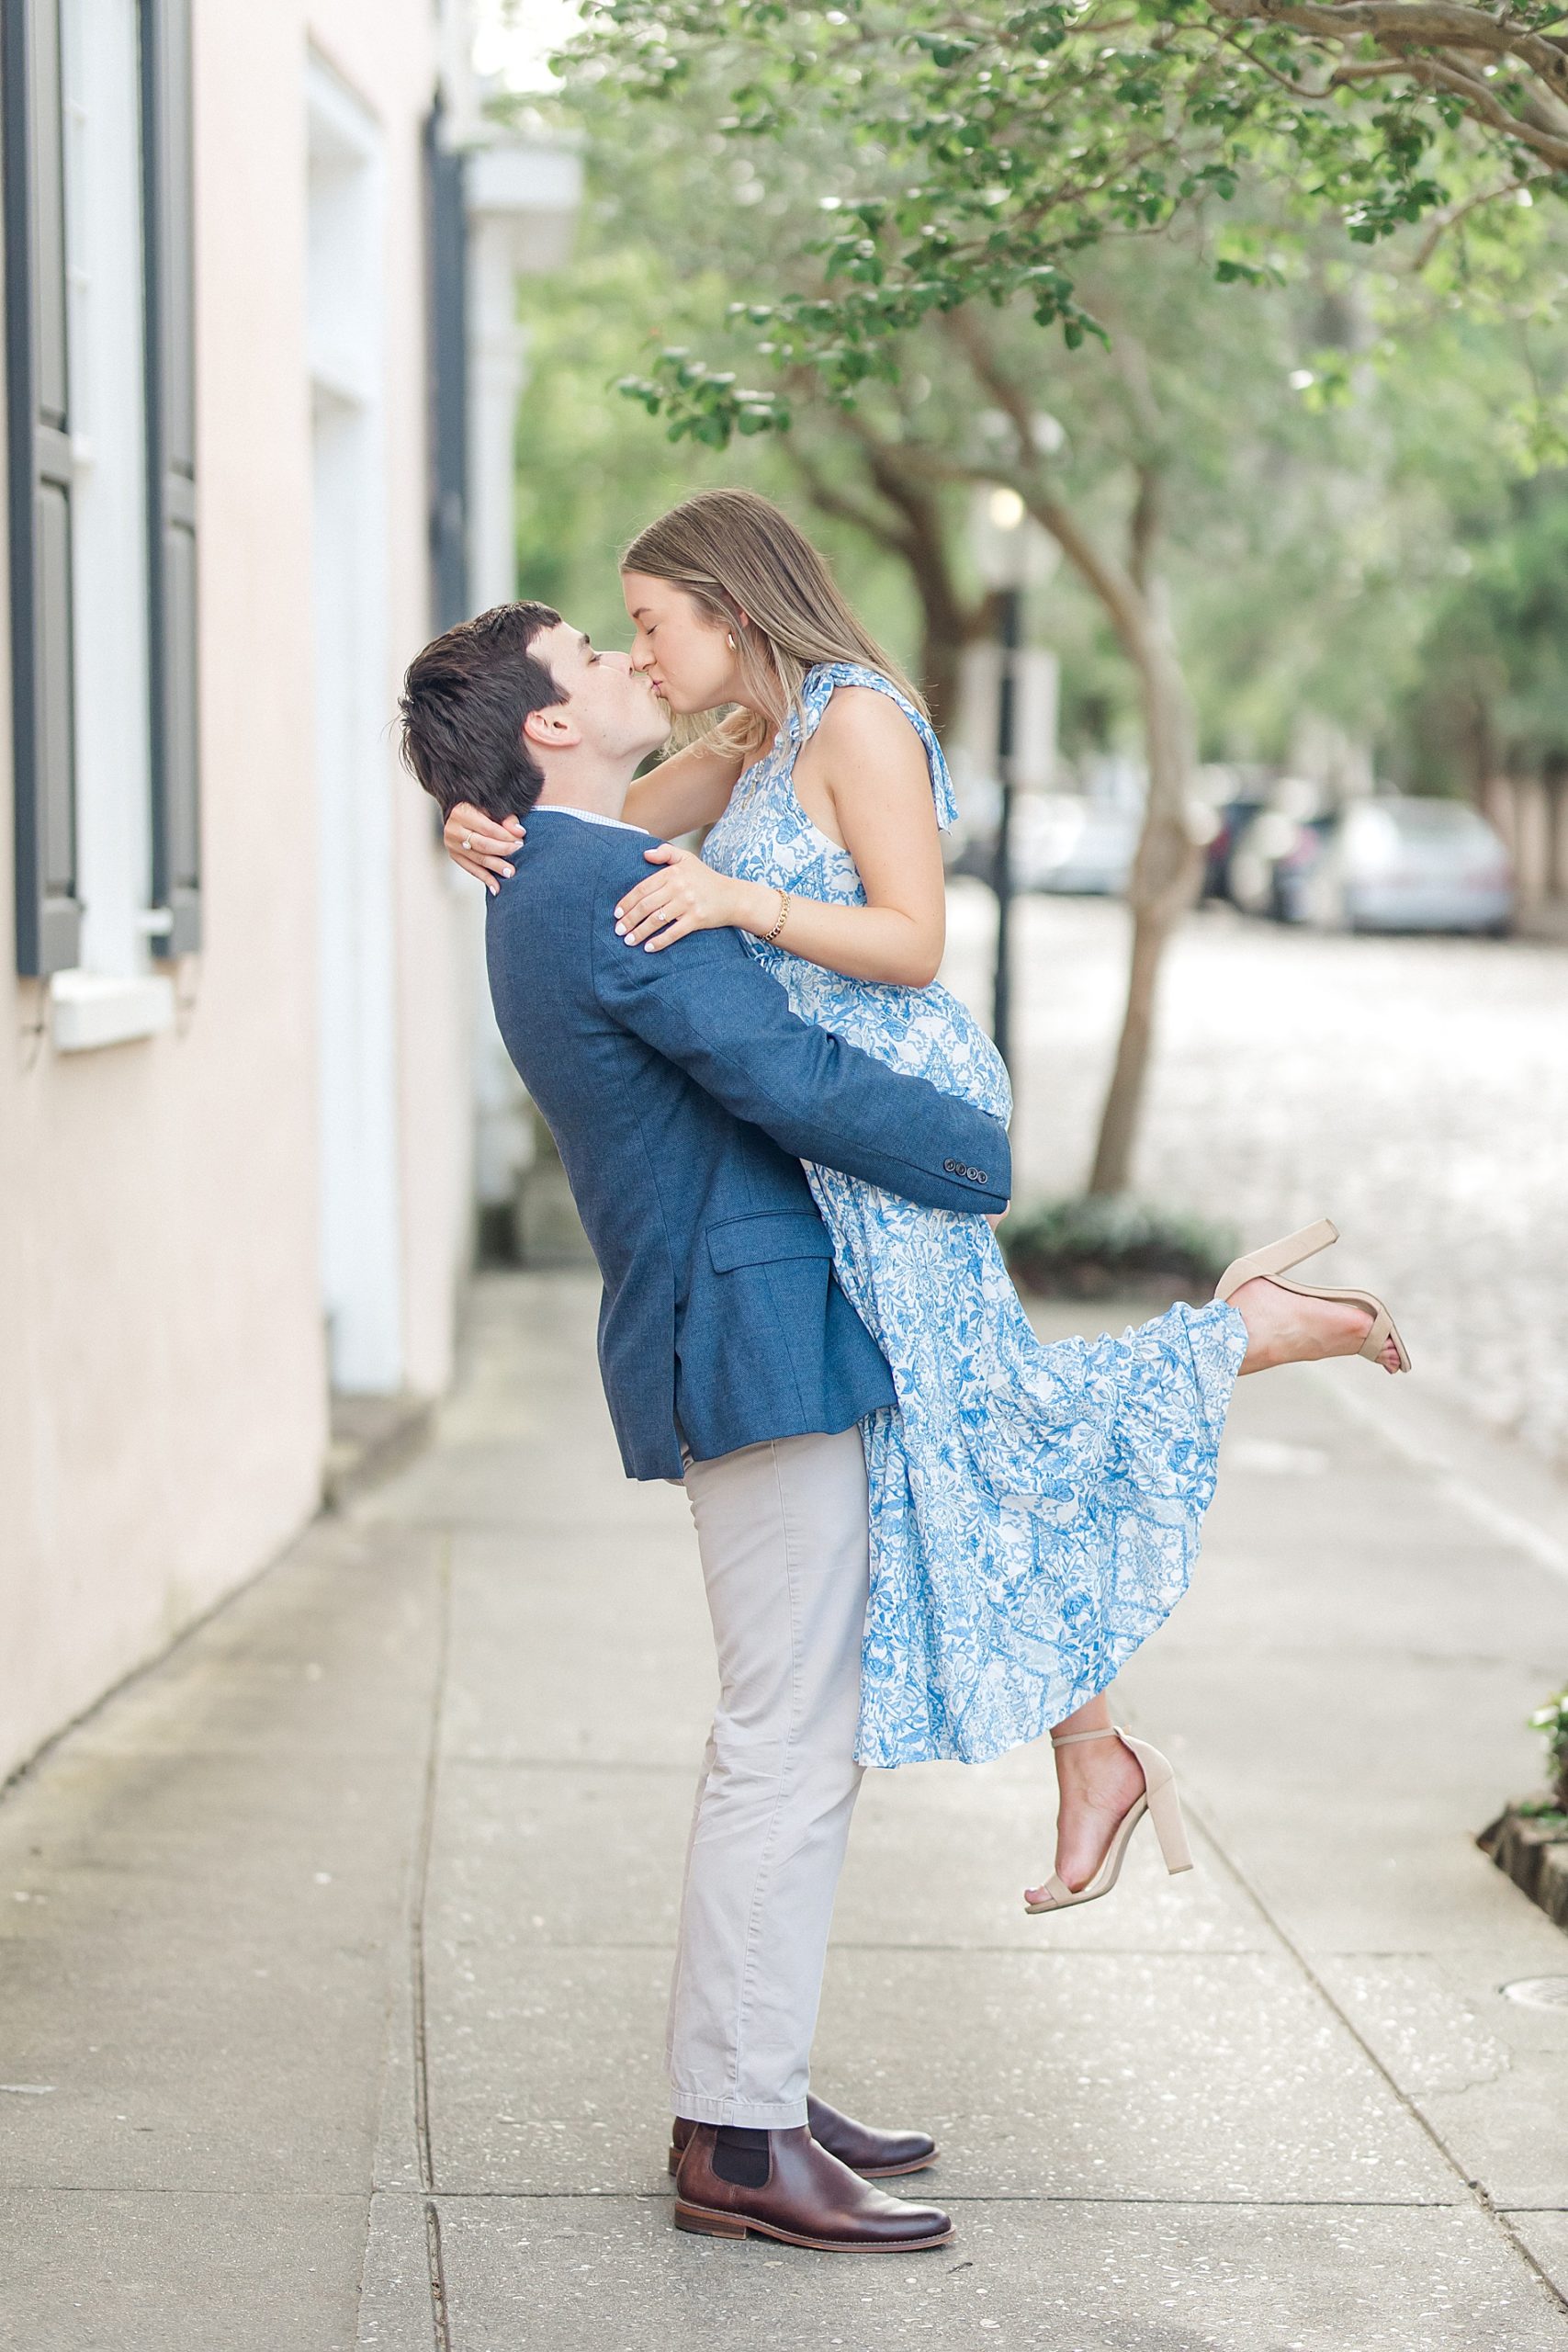 man lifts his fiance up on the sidewalk in SC